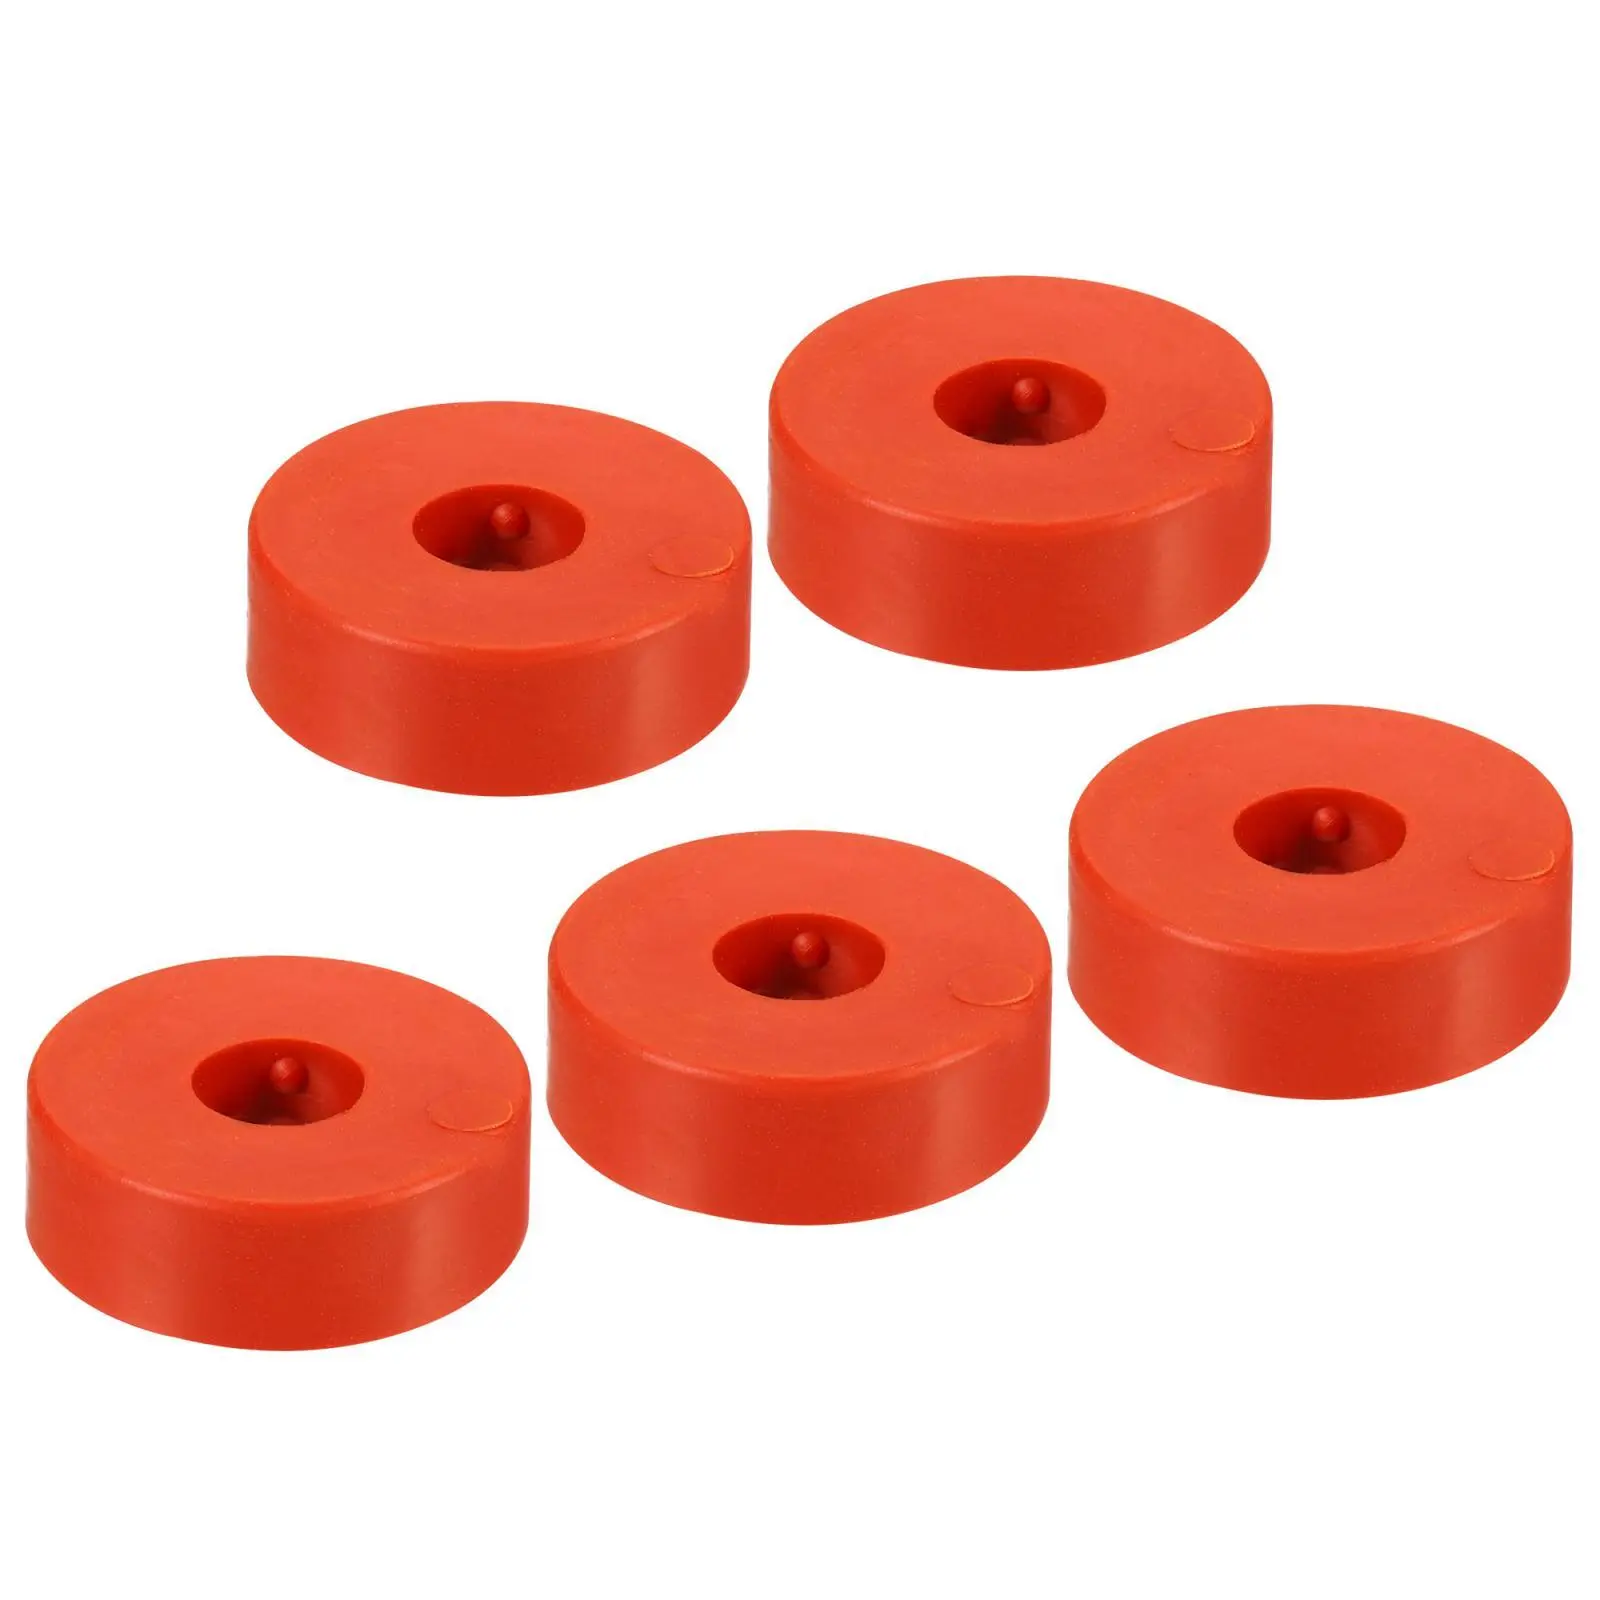 Anti Vibration Washer 30 x 10 x 10mm Gasket Spacer for Air Conditioner Red 5pcs